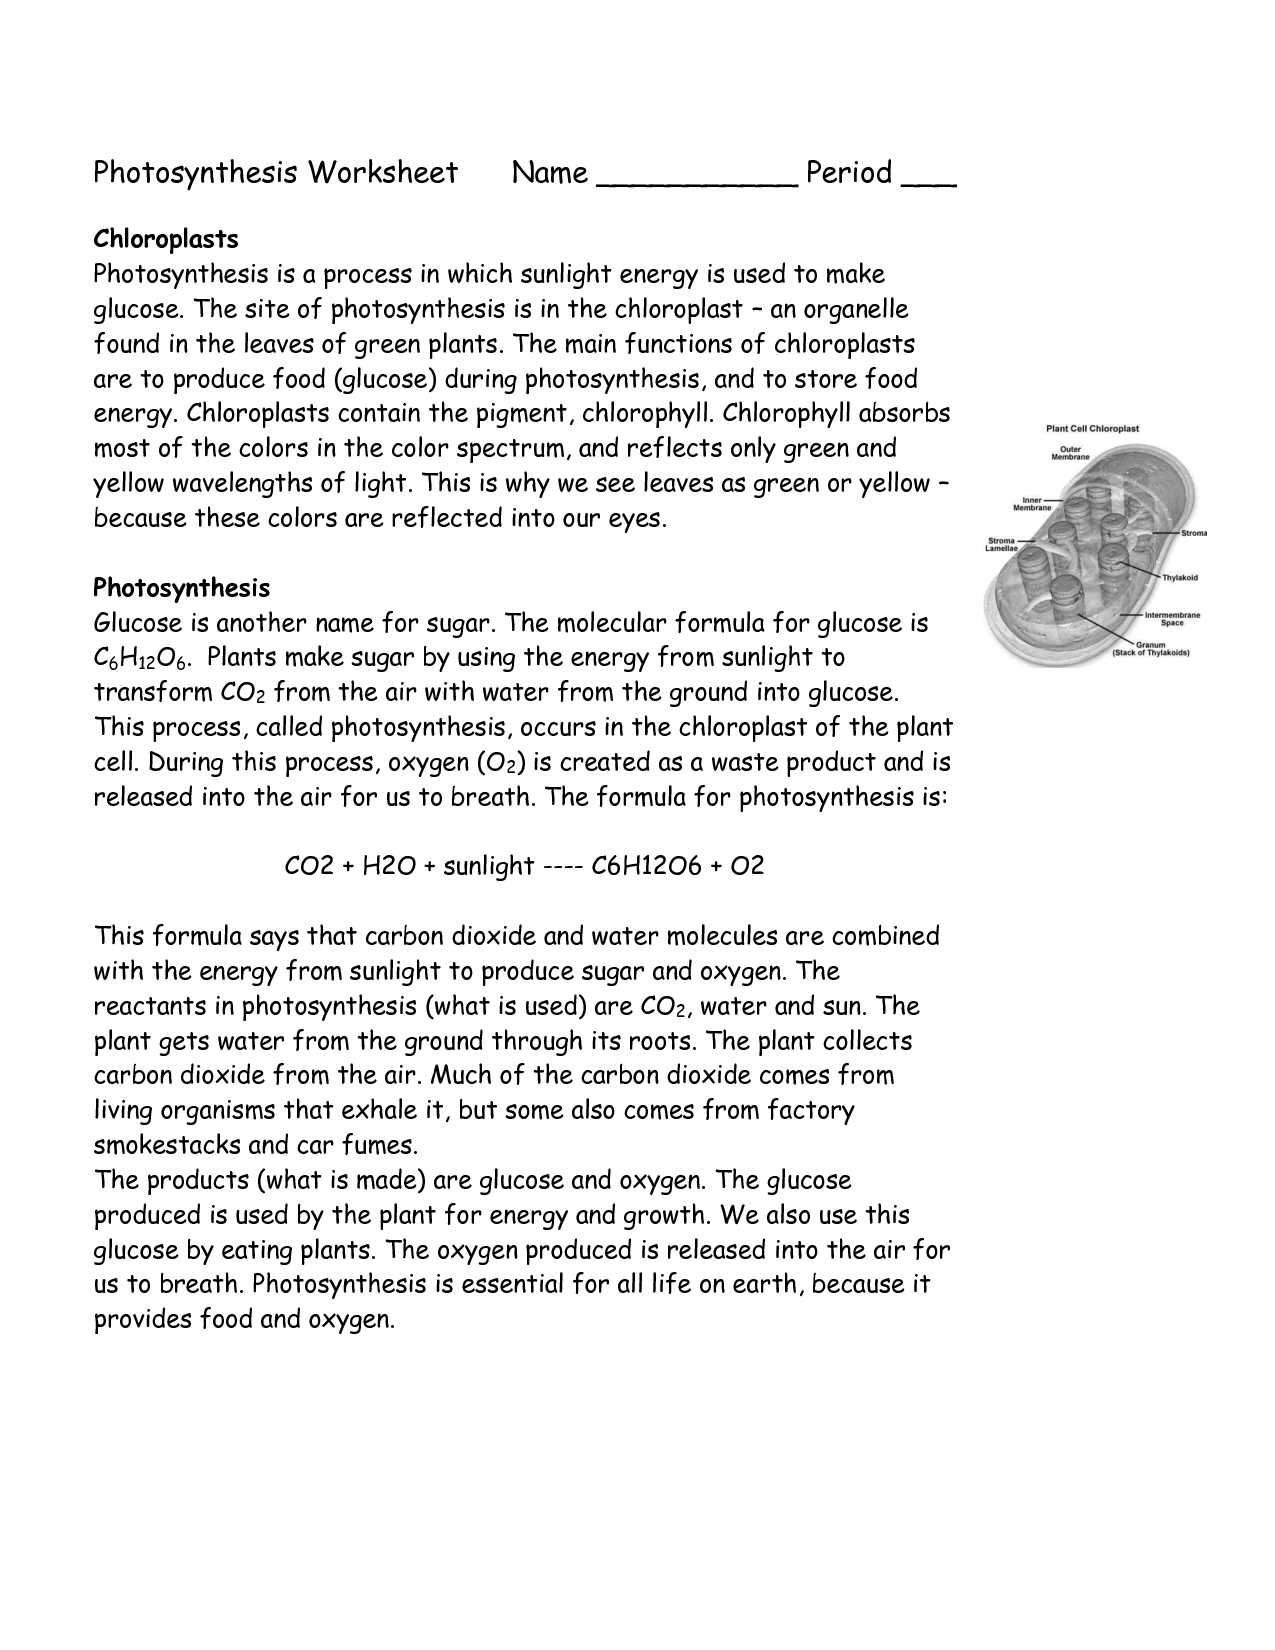 Photosynthesis and Cellular Respiration Worksheet Answers together with Worksheet Synthesis Making Energy Worksheet Answers Carlos